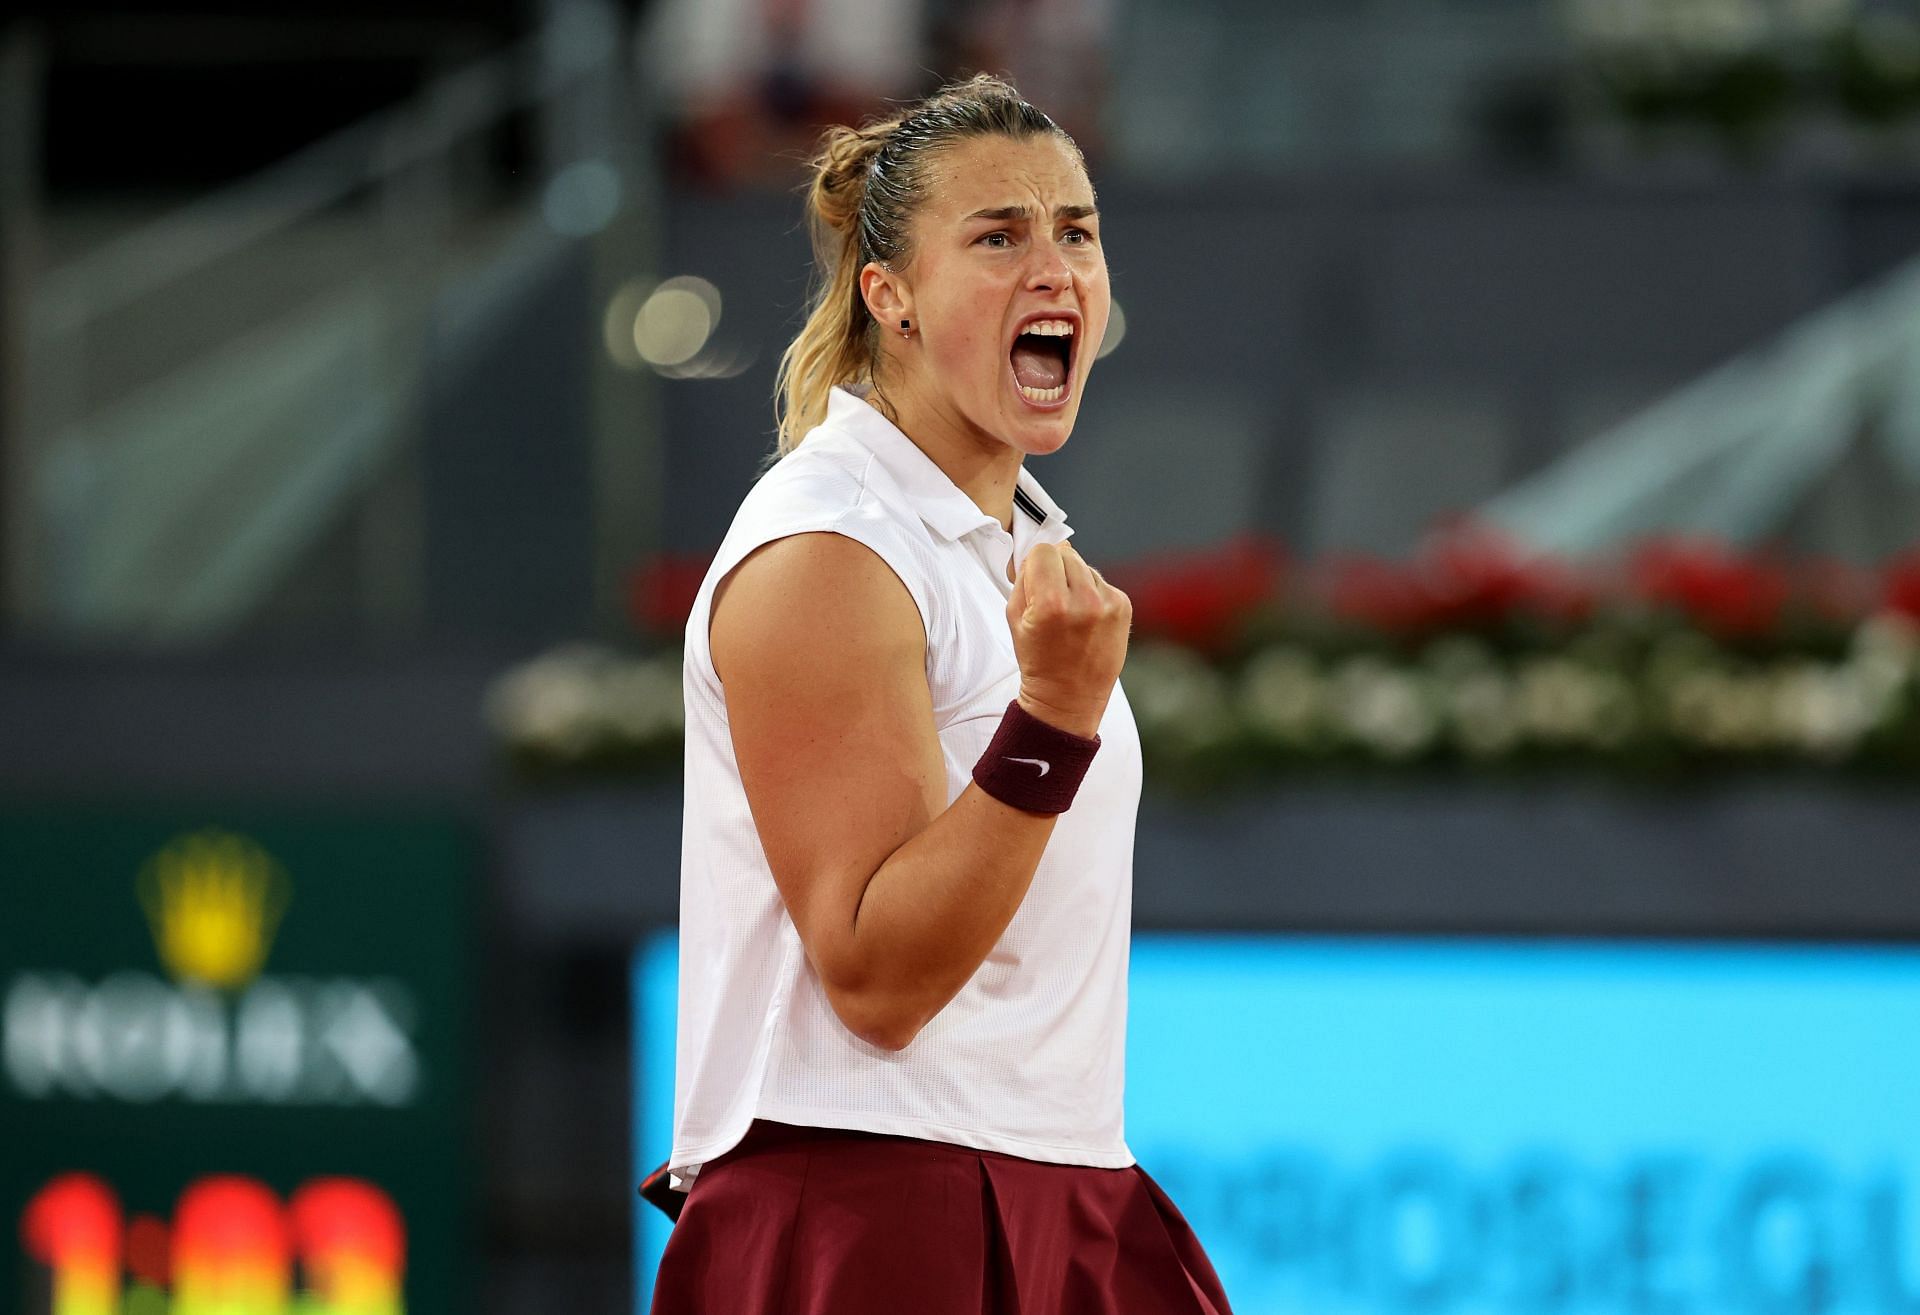 Aryna Sabalenka will aim to end her season on a high at the WTA Finals after a tough few weeks.